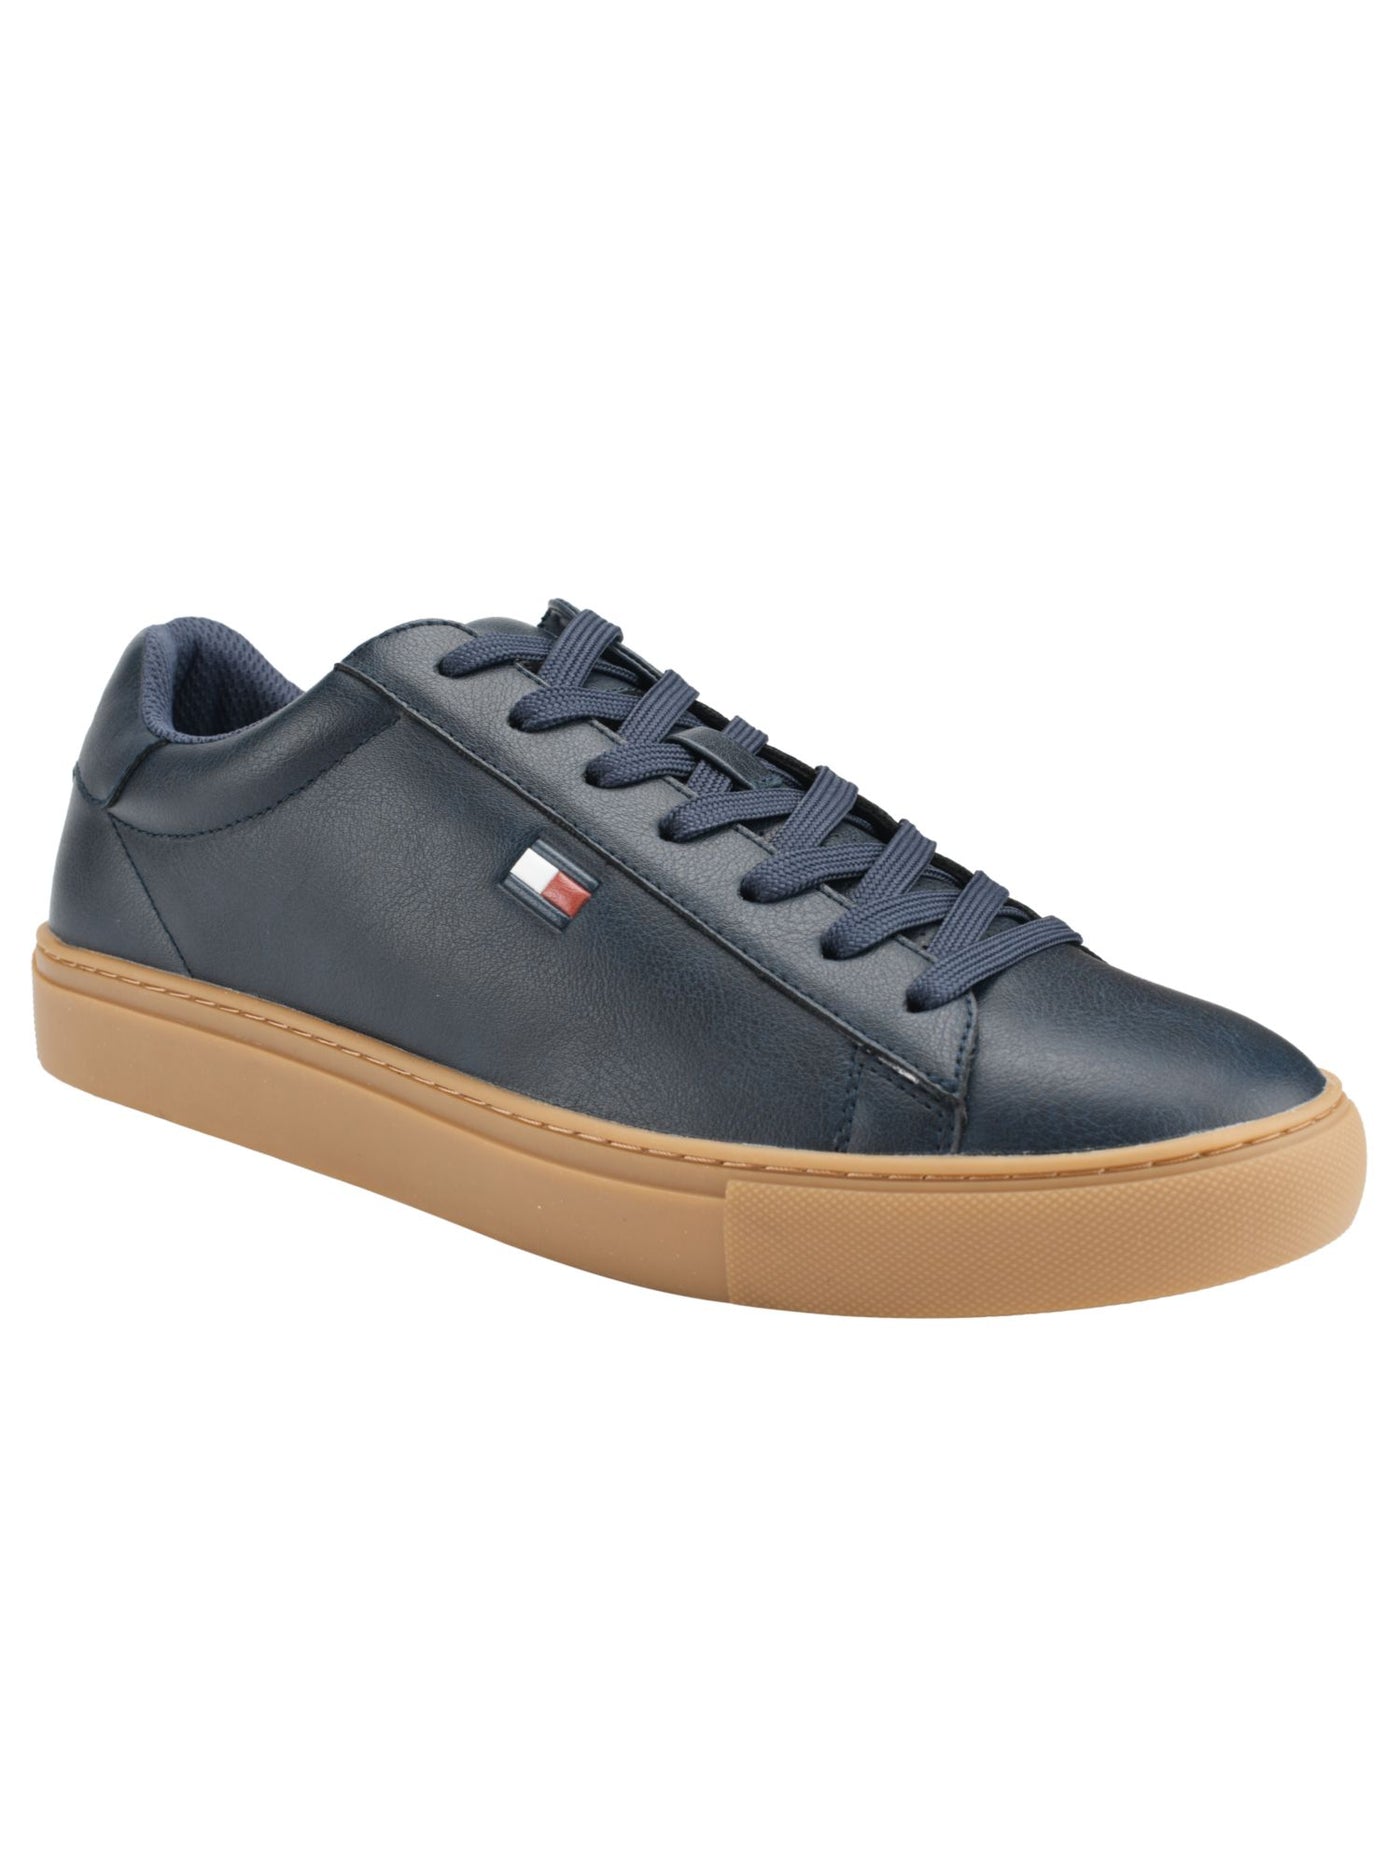 TOMMY HILFIGER Mens Navy Cushioned Brecon Round Toe Lace-Up Sneakers Shoes 7